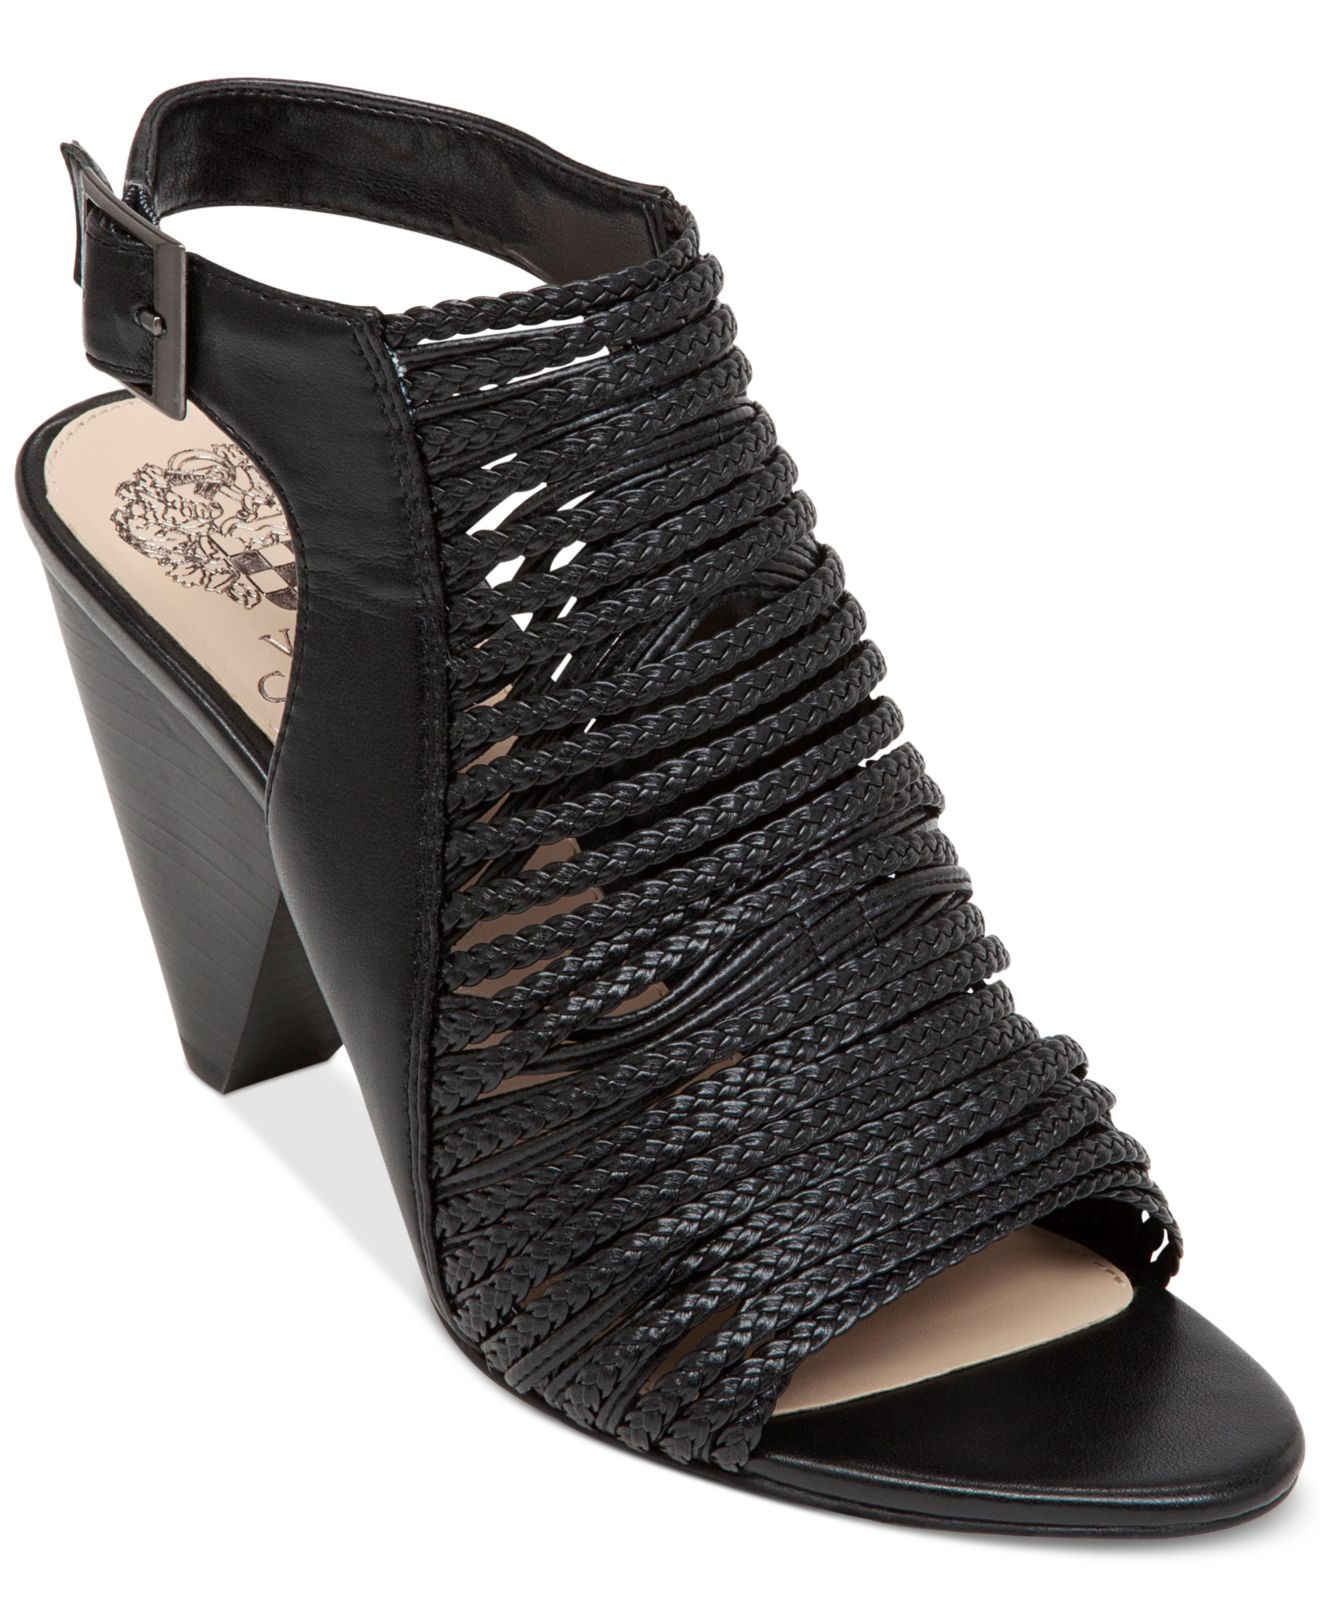 Vince Camuto Entik Braided Dress Sandals in Black - Lyst